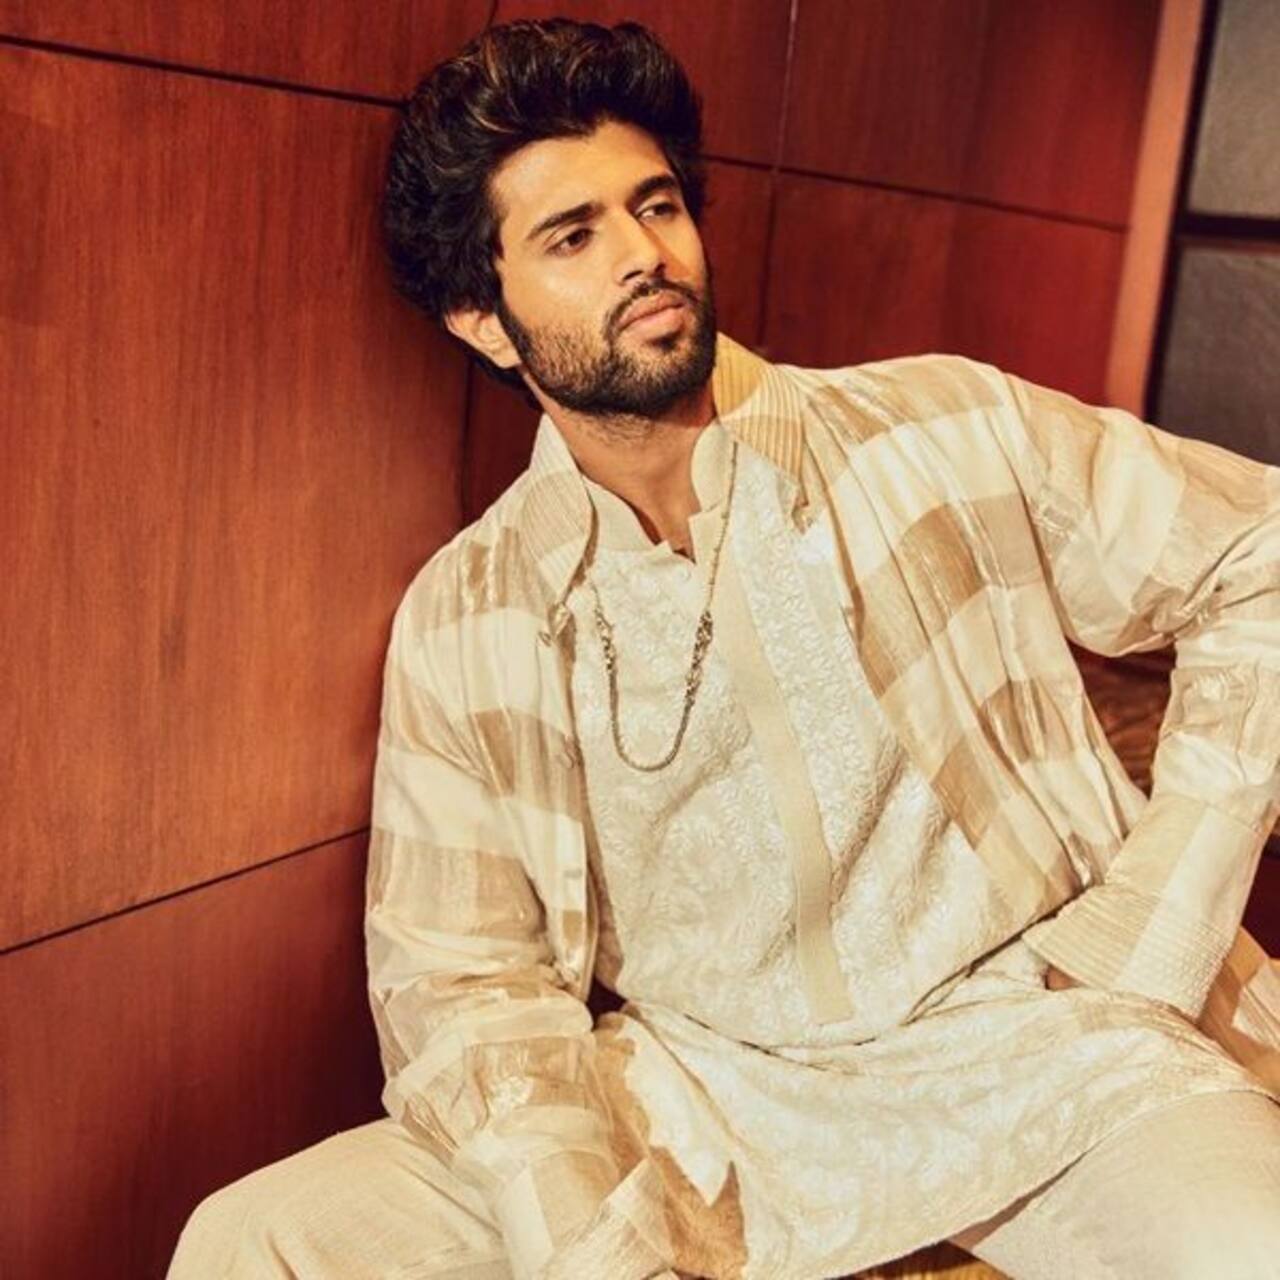 Vijay Deverakonda reacts to 'Boycott Liger' trend; says he trusts God and has his mother's blessings